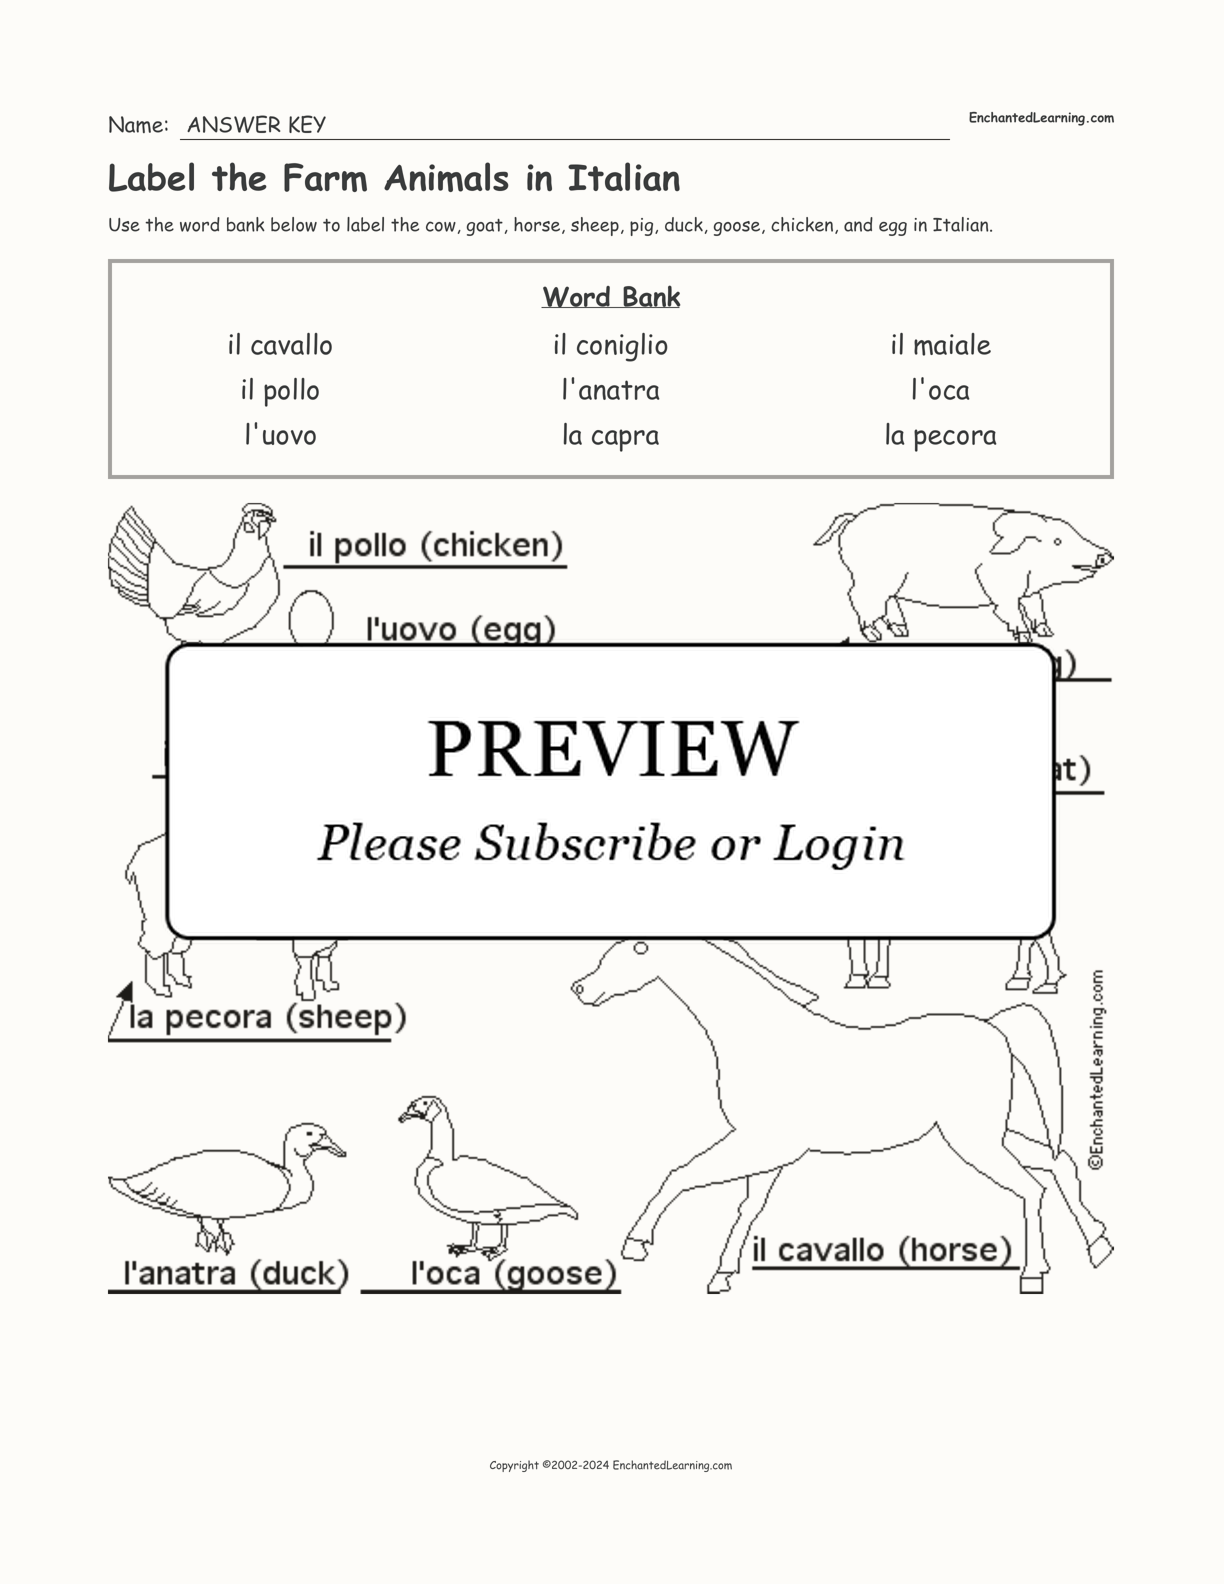 Label the Farm Animals in Italian interactive worksheet page 2